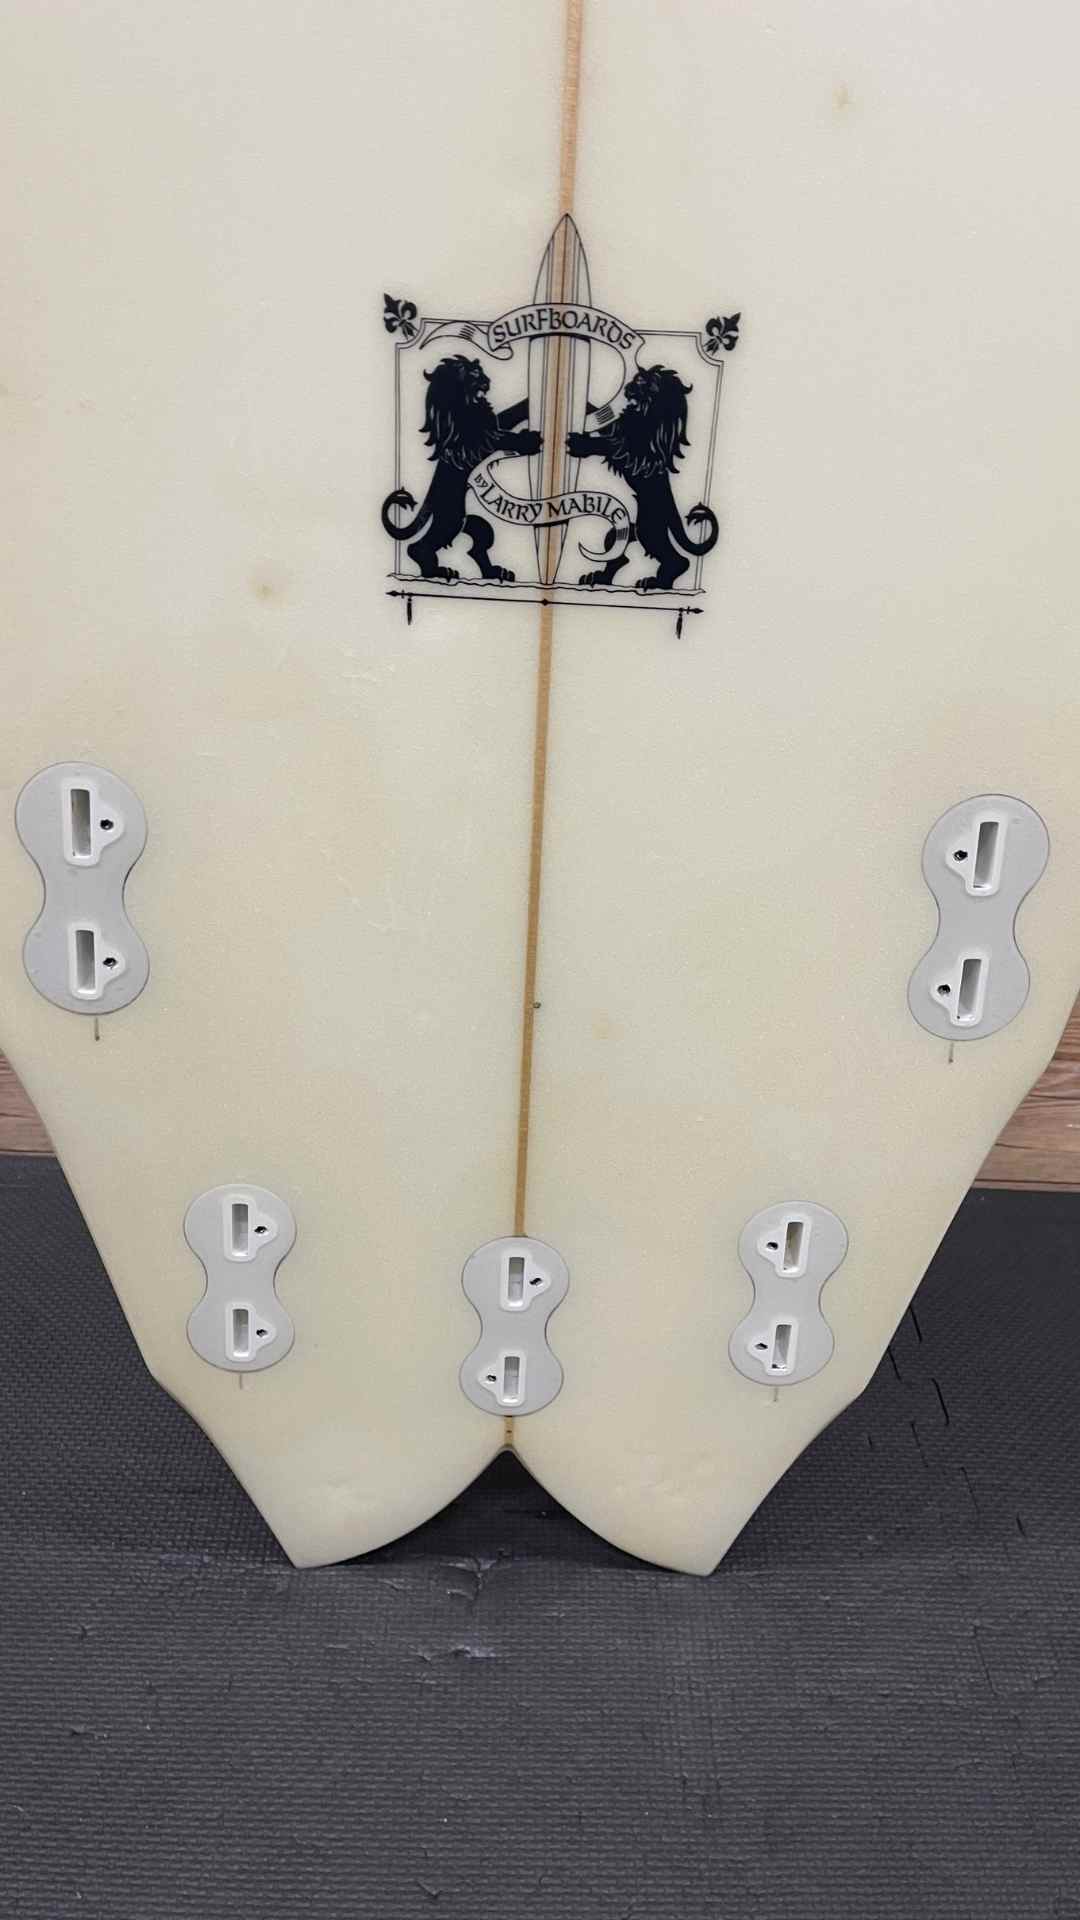 Double Wing 5-Fin 5'8"